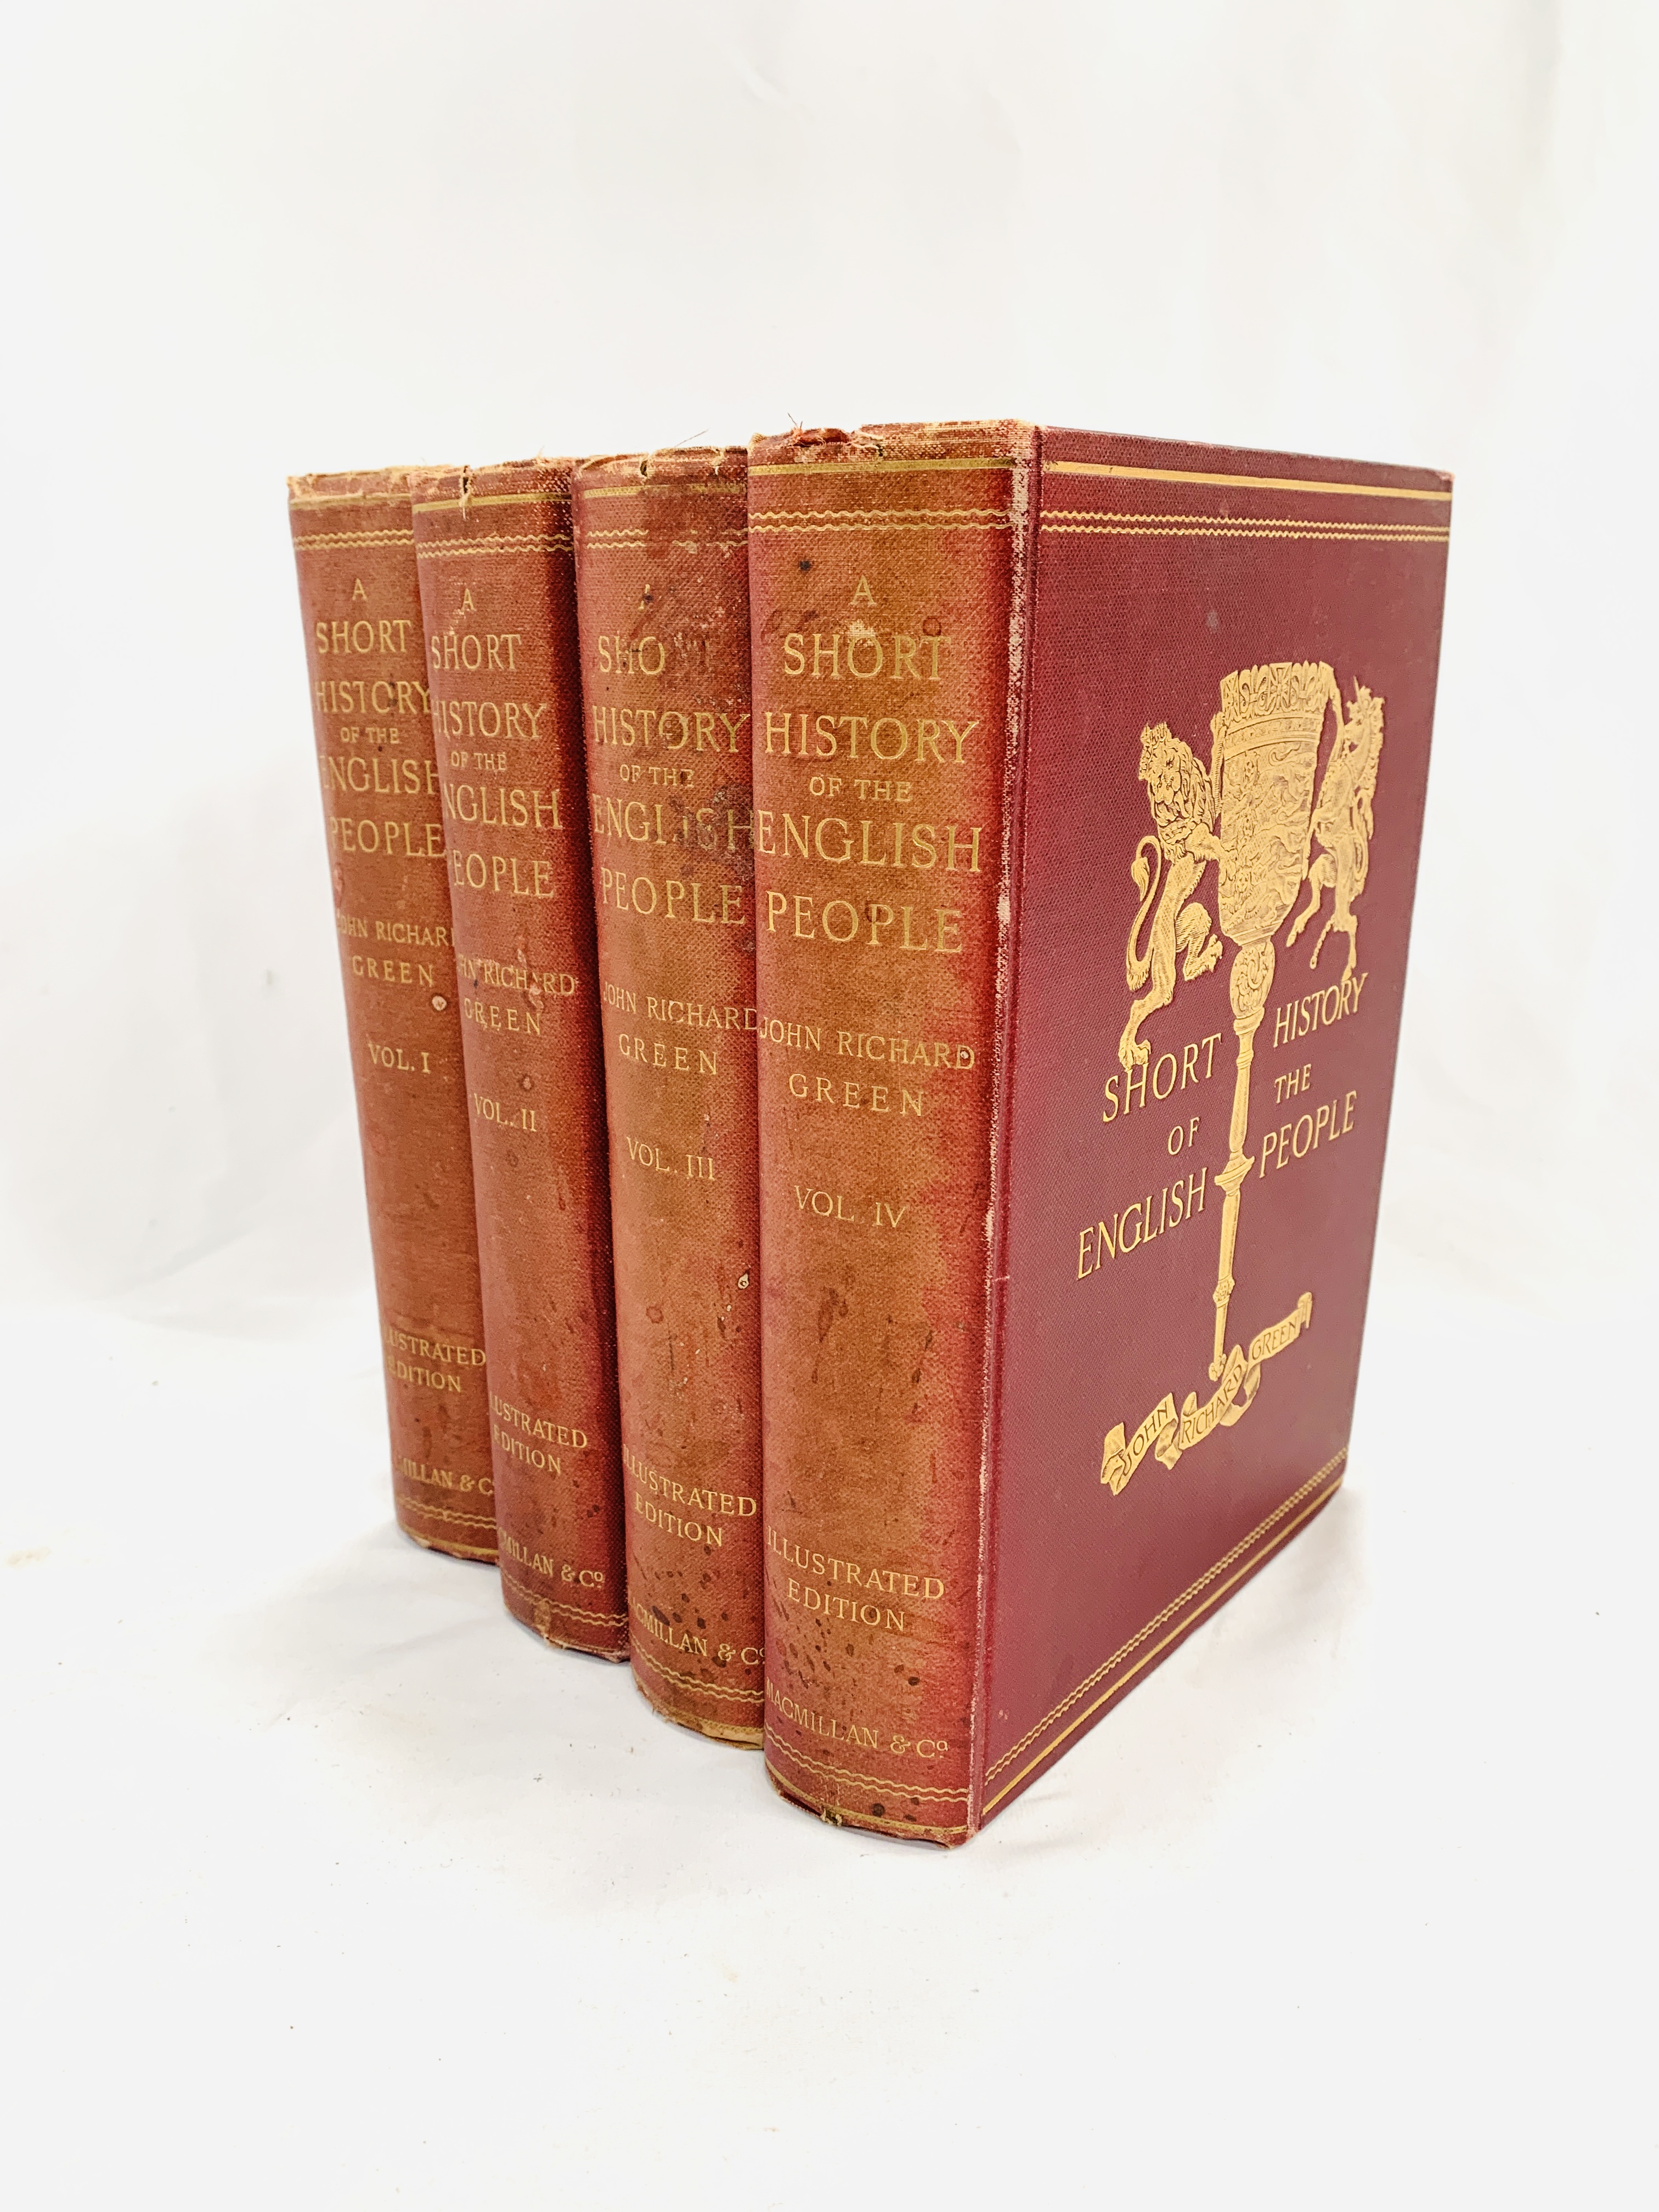 A Short History of the English People by J R Green, published 1893